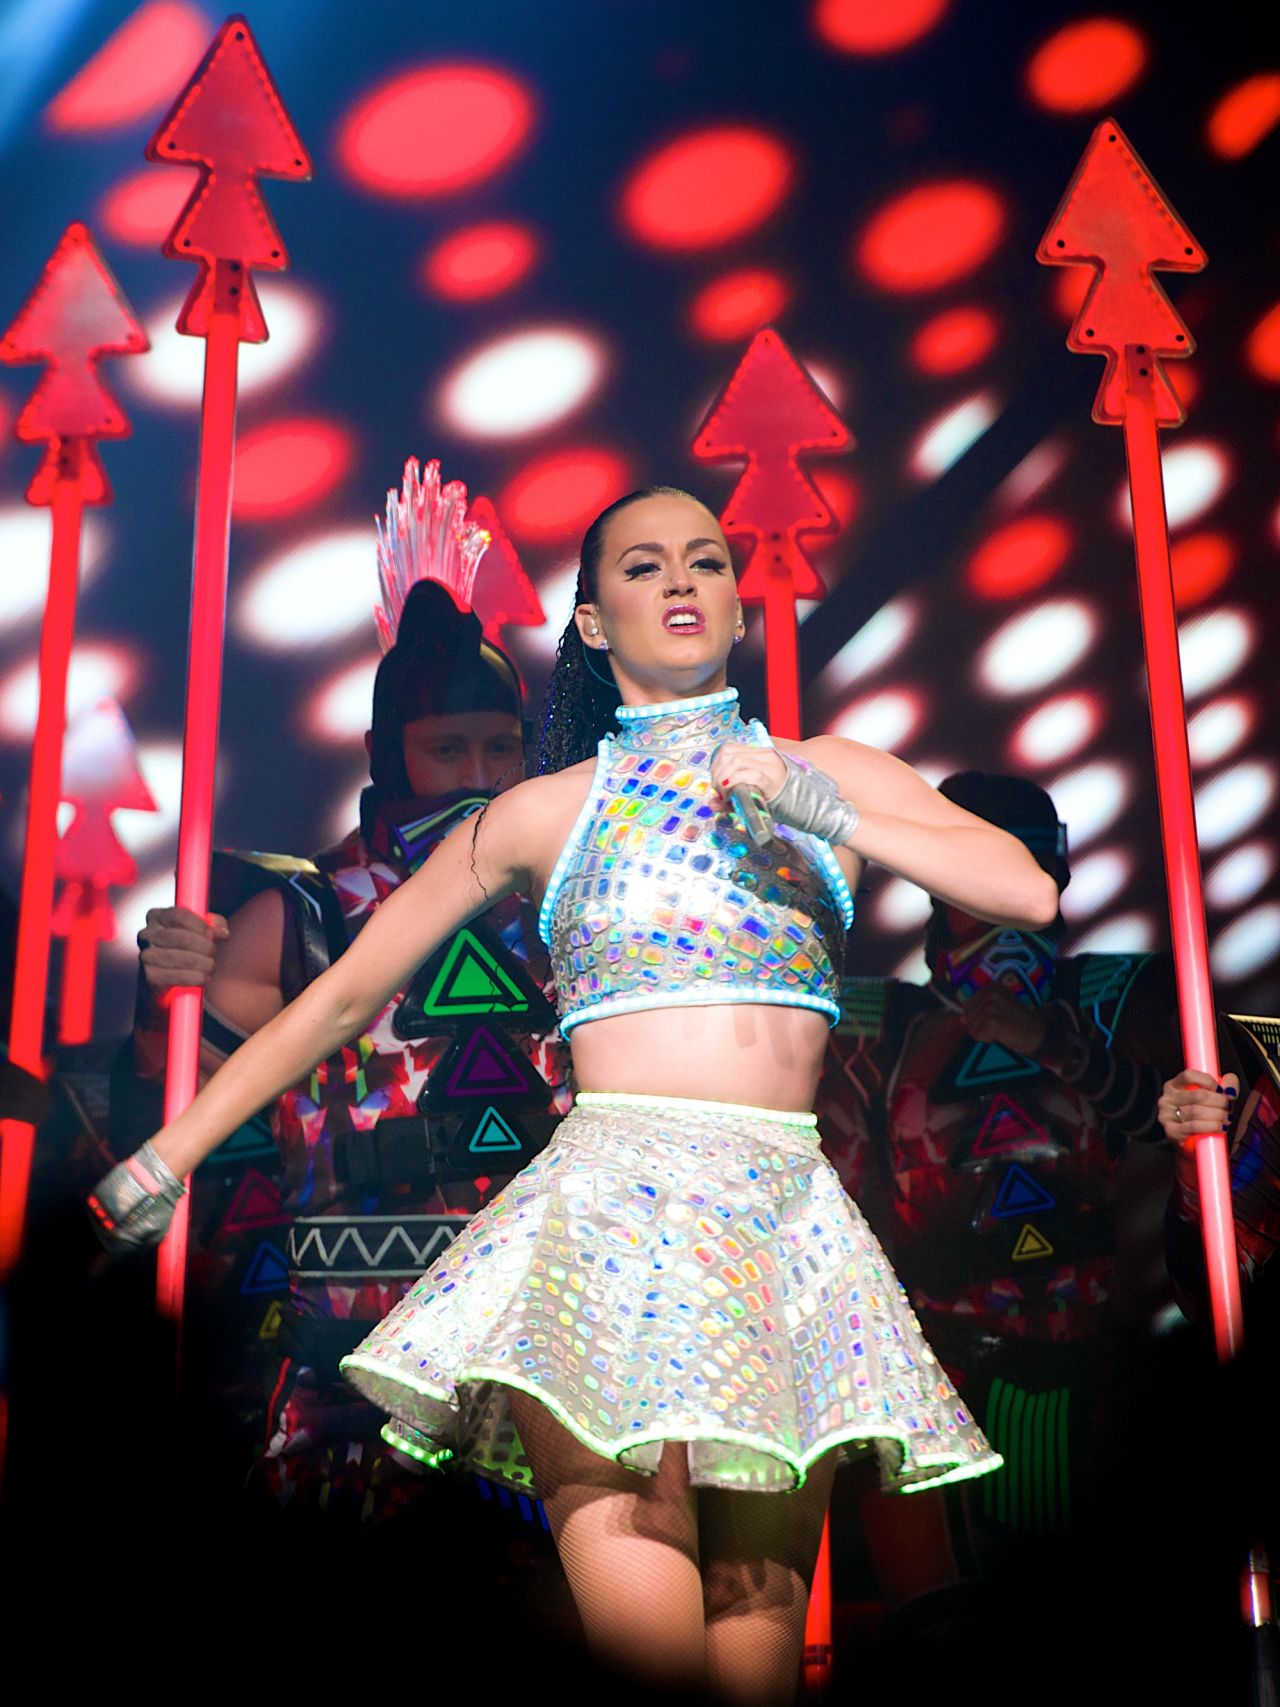 Katy Perry The Prismatic World Tour at the Rod Laver Arena in